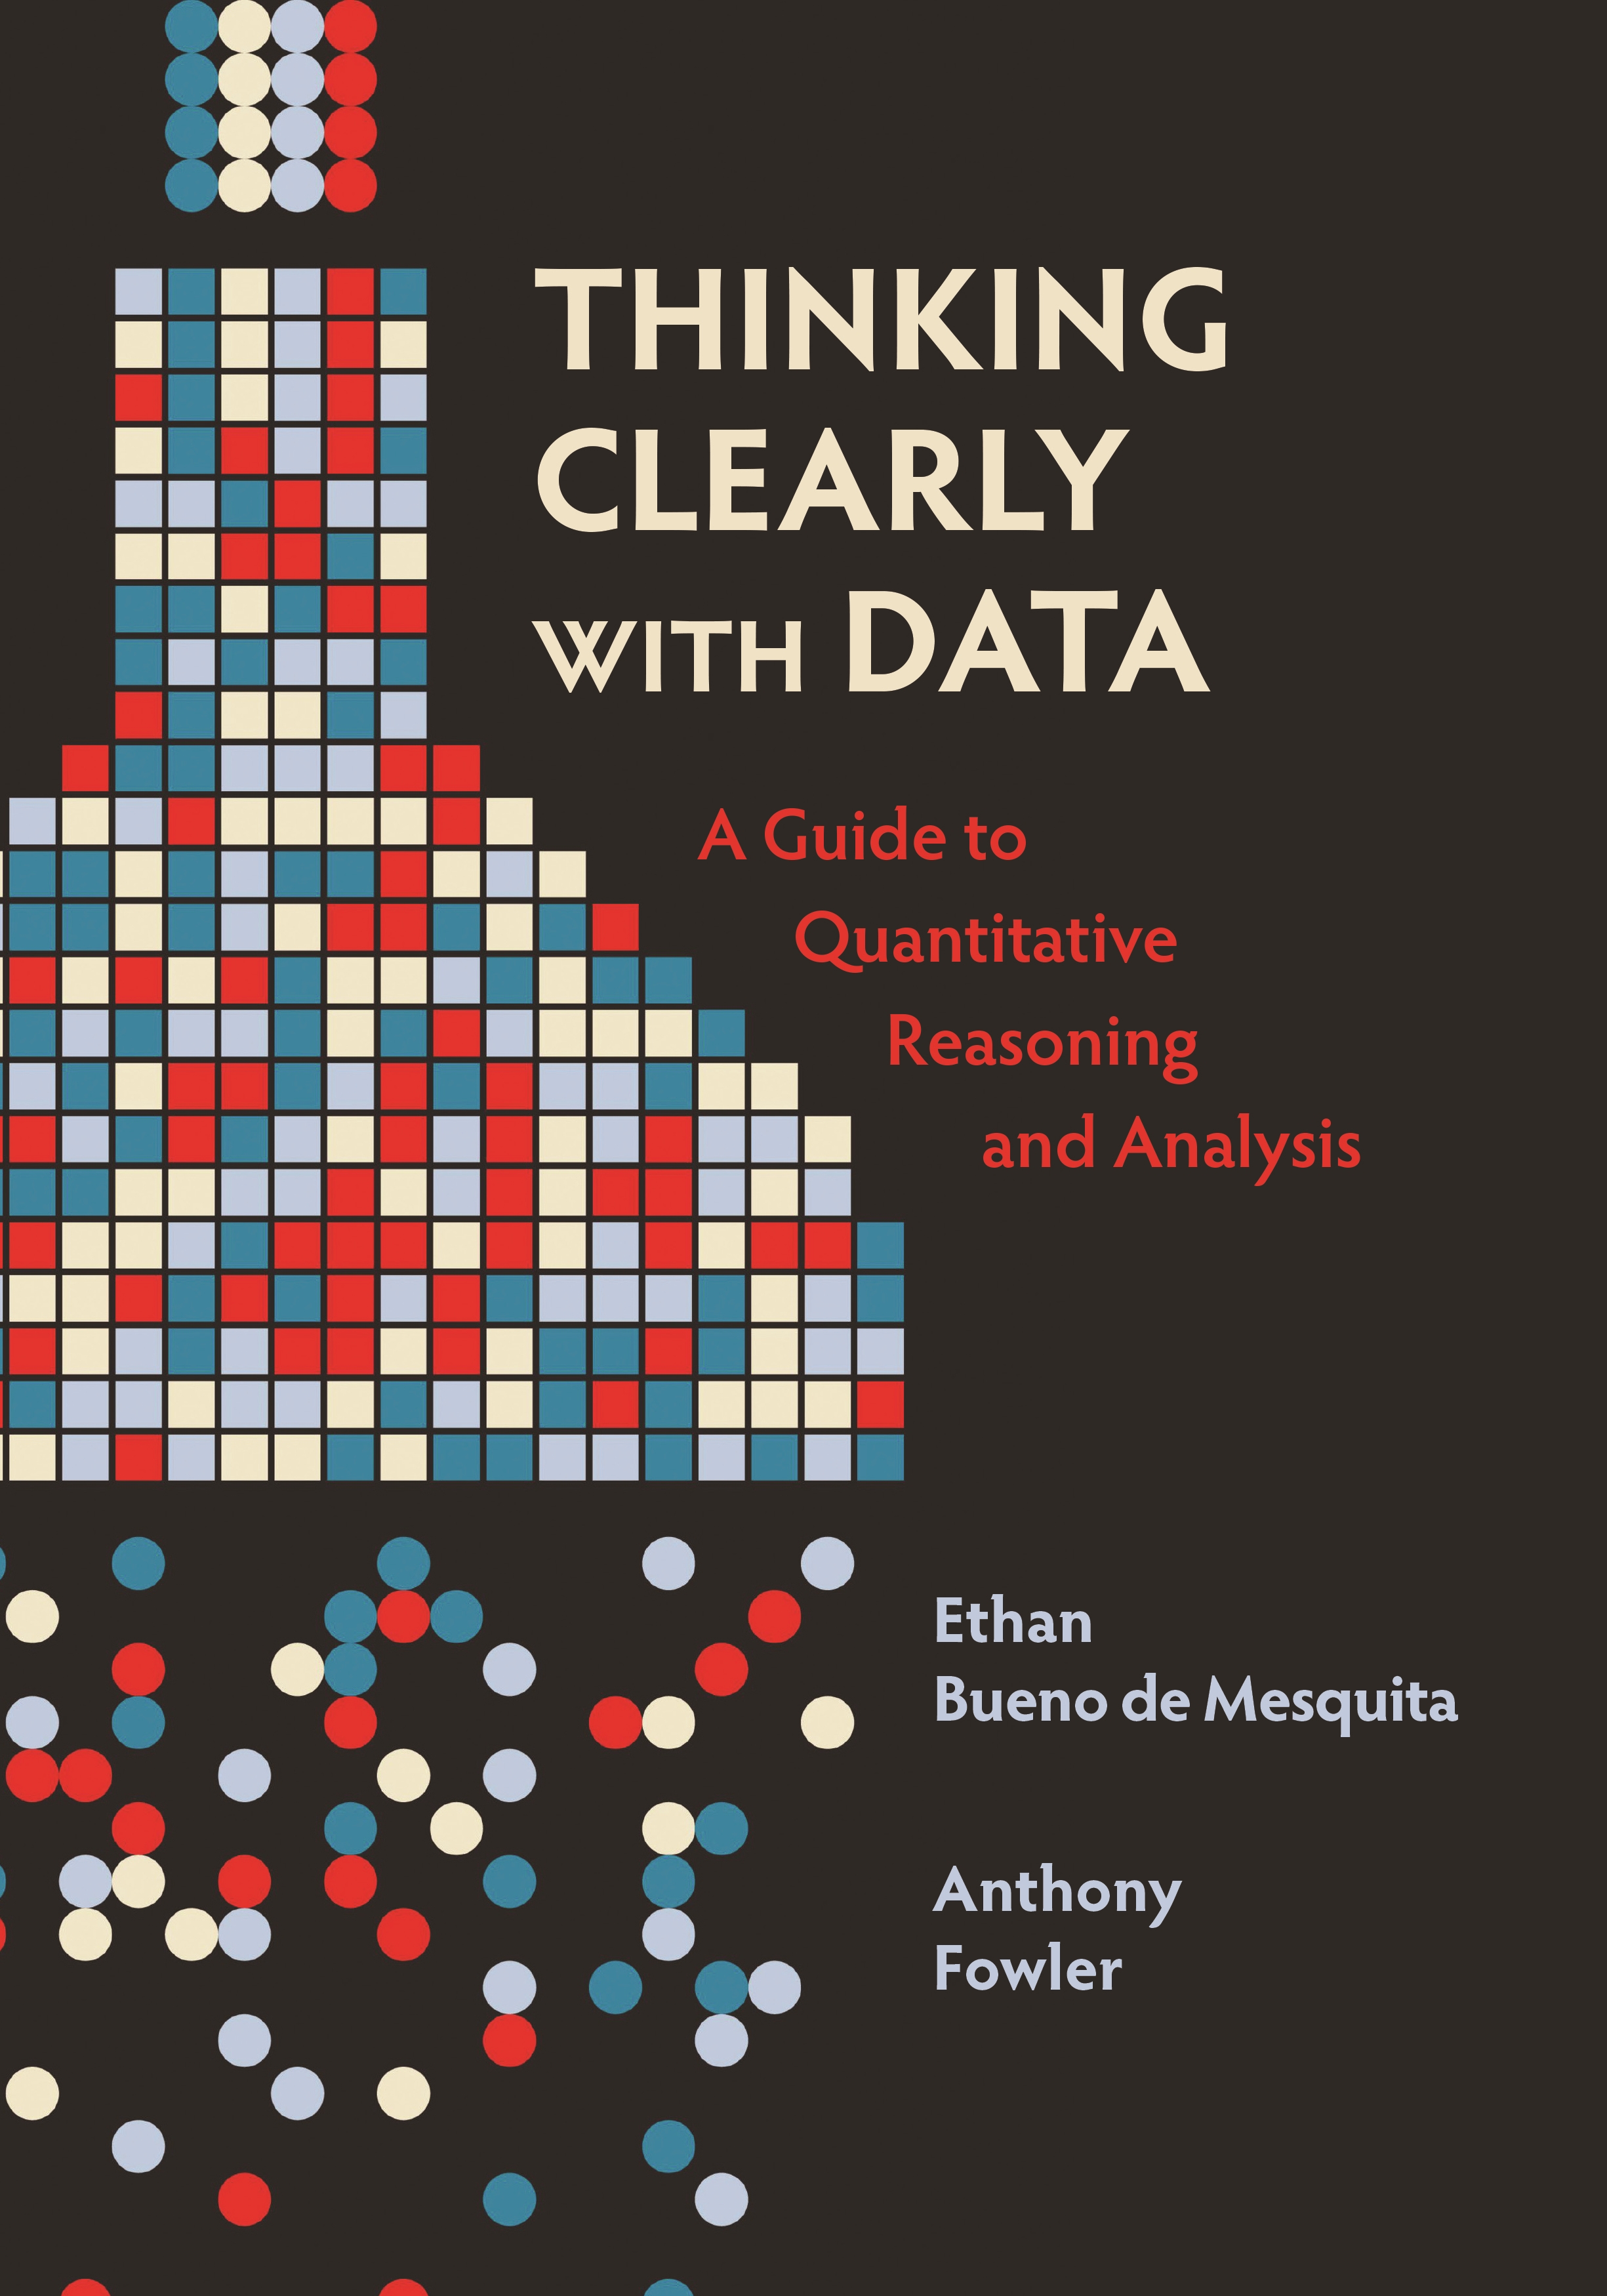 Press　Princeton　University　with　Clearly　Thinking　Data